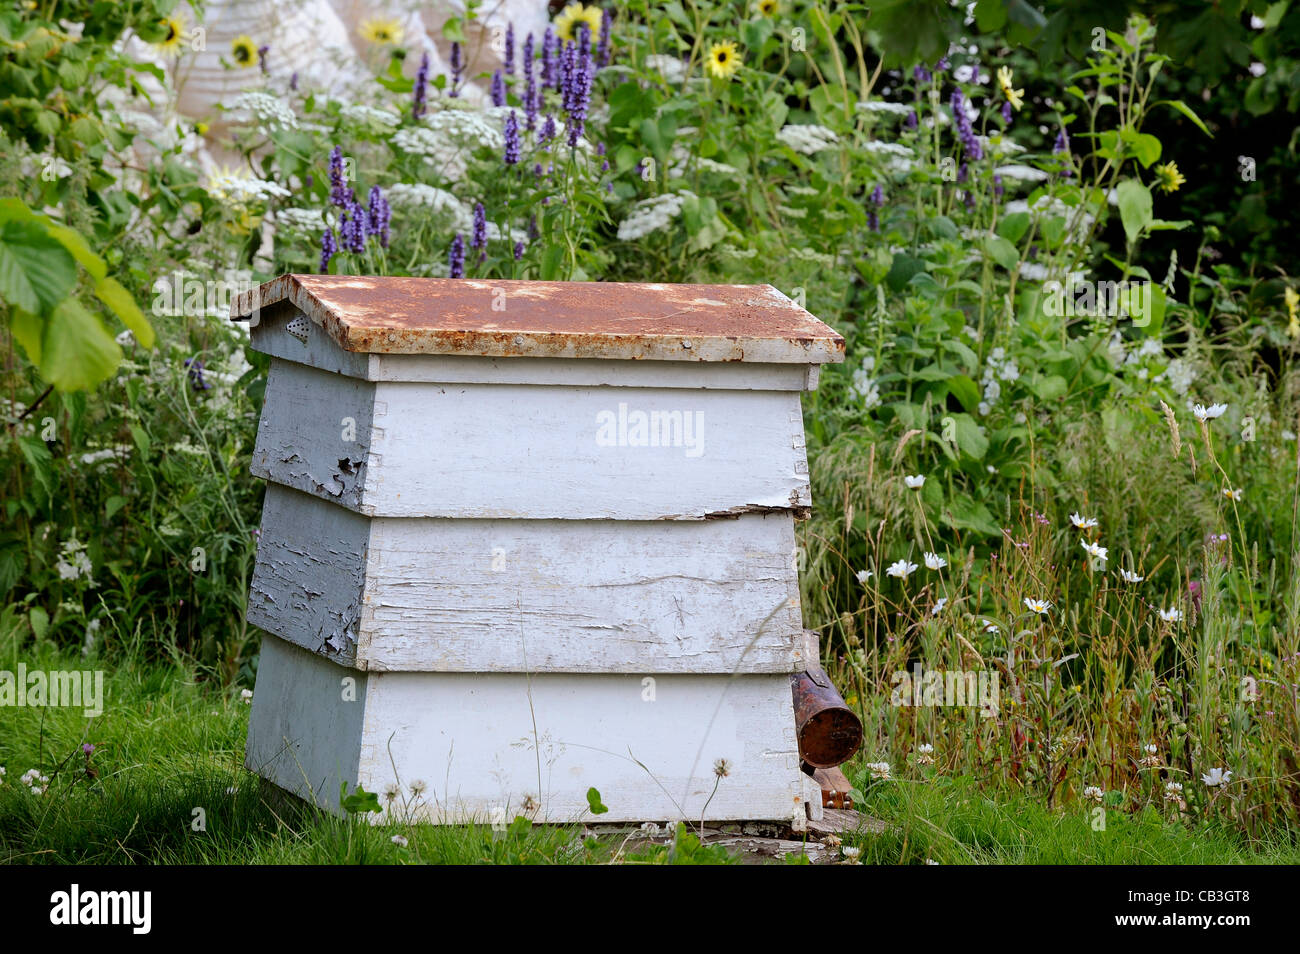 Traditional beehive in garden with wildflowers Stock Photo